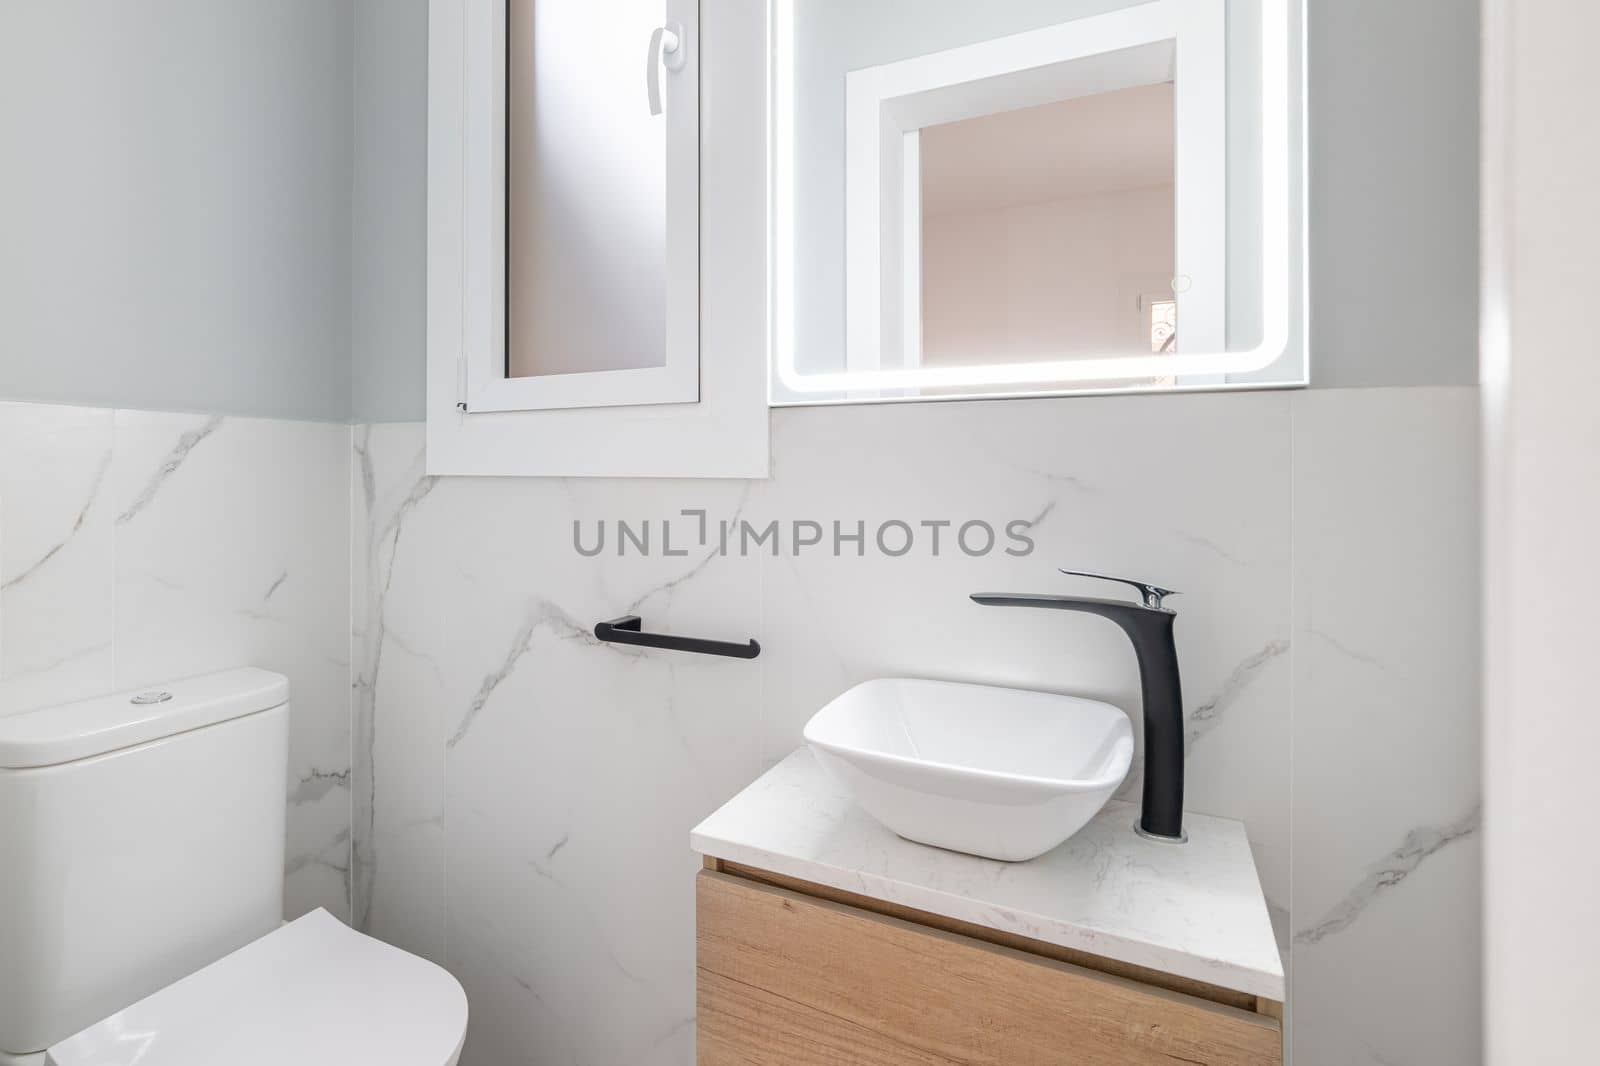 Small bathroom with toilet and designer sink on small vanity with black faucet. Walls of room are made of white natural marble tiles. Square mirror is illuminated with fluorescent light